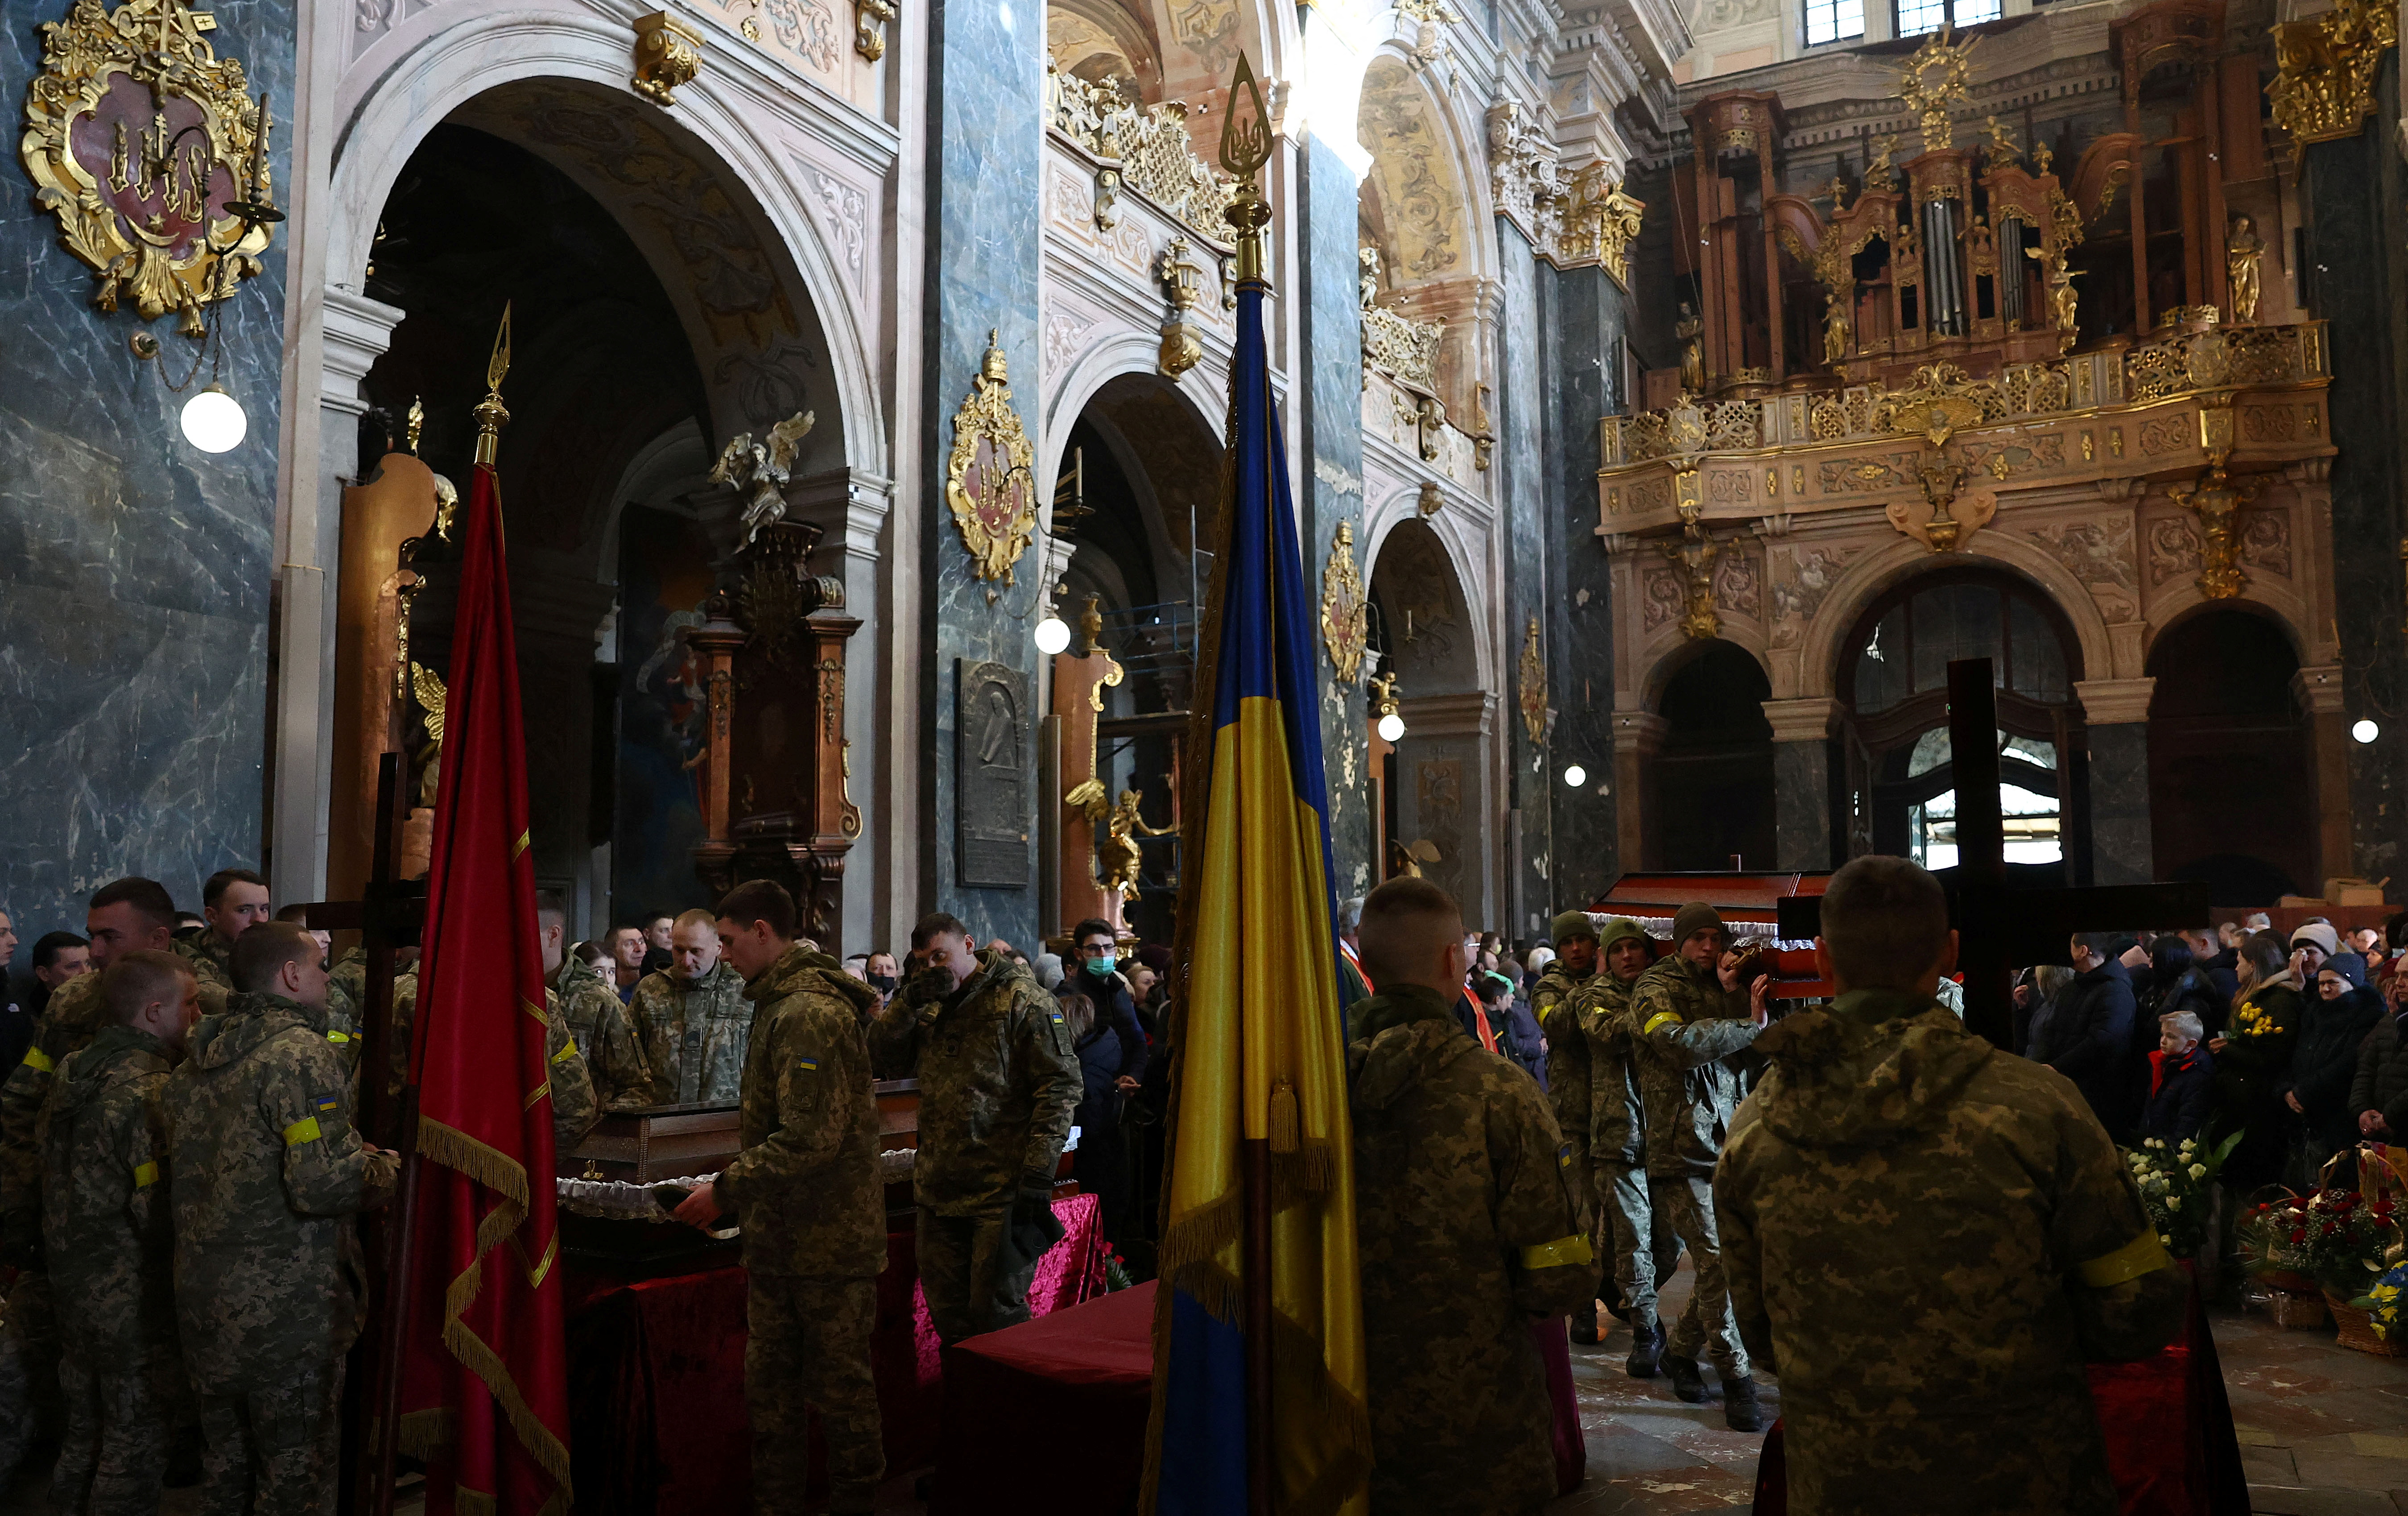 People attend the memorial and funeral service for three fallen Ukrainian Army service men in Lviv